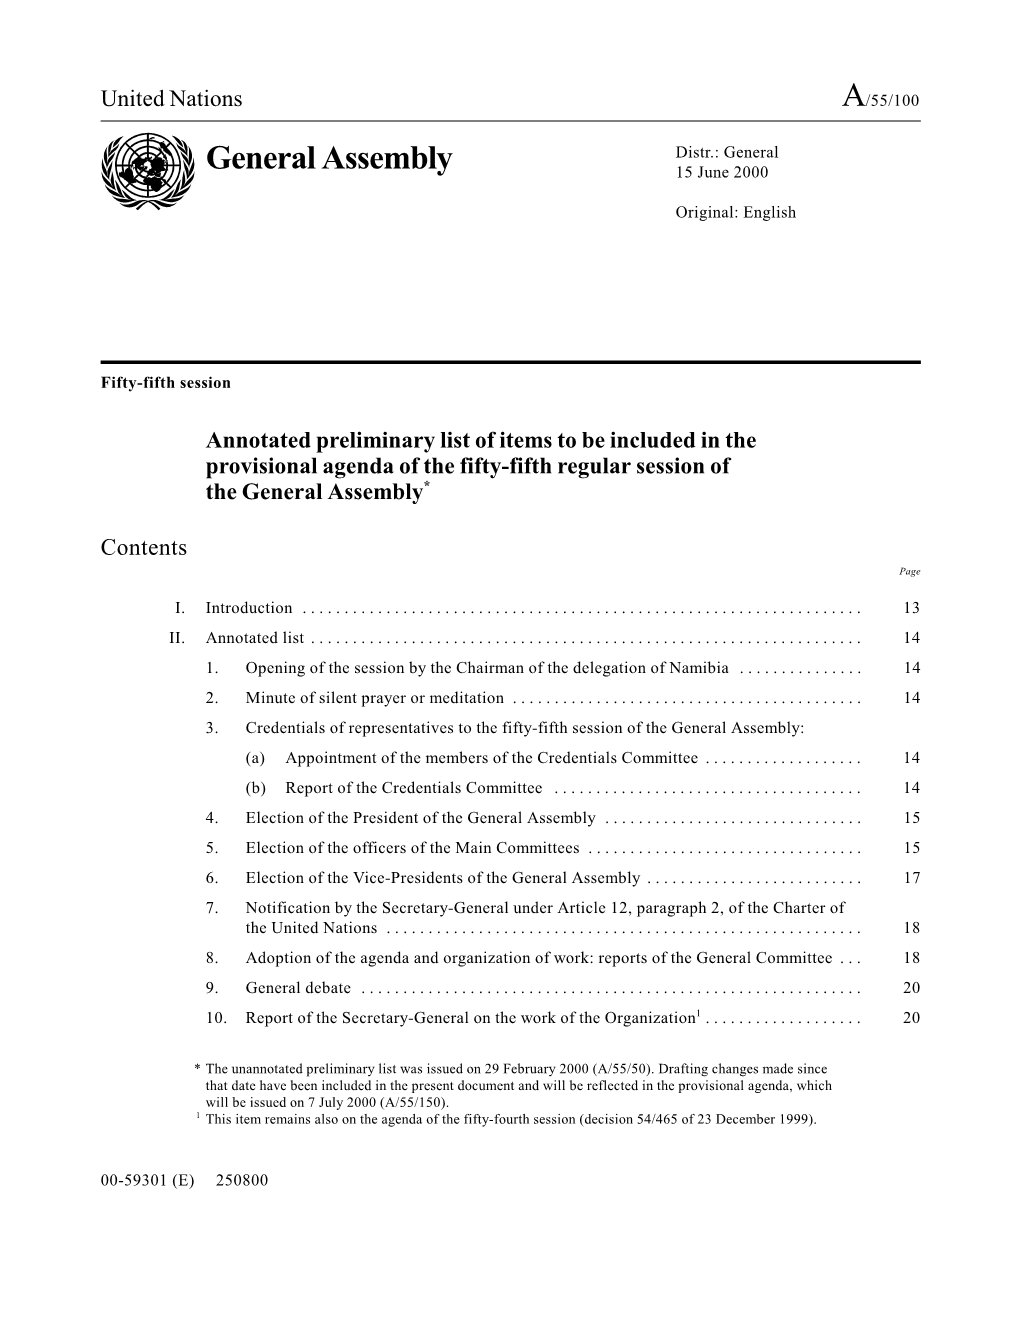 General Assembly 15 June 2000